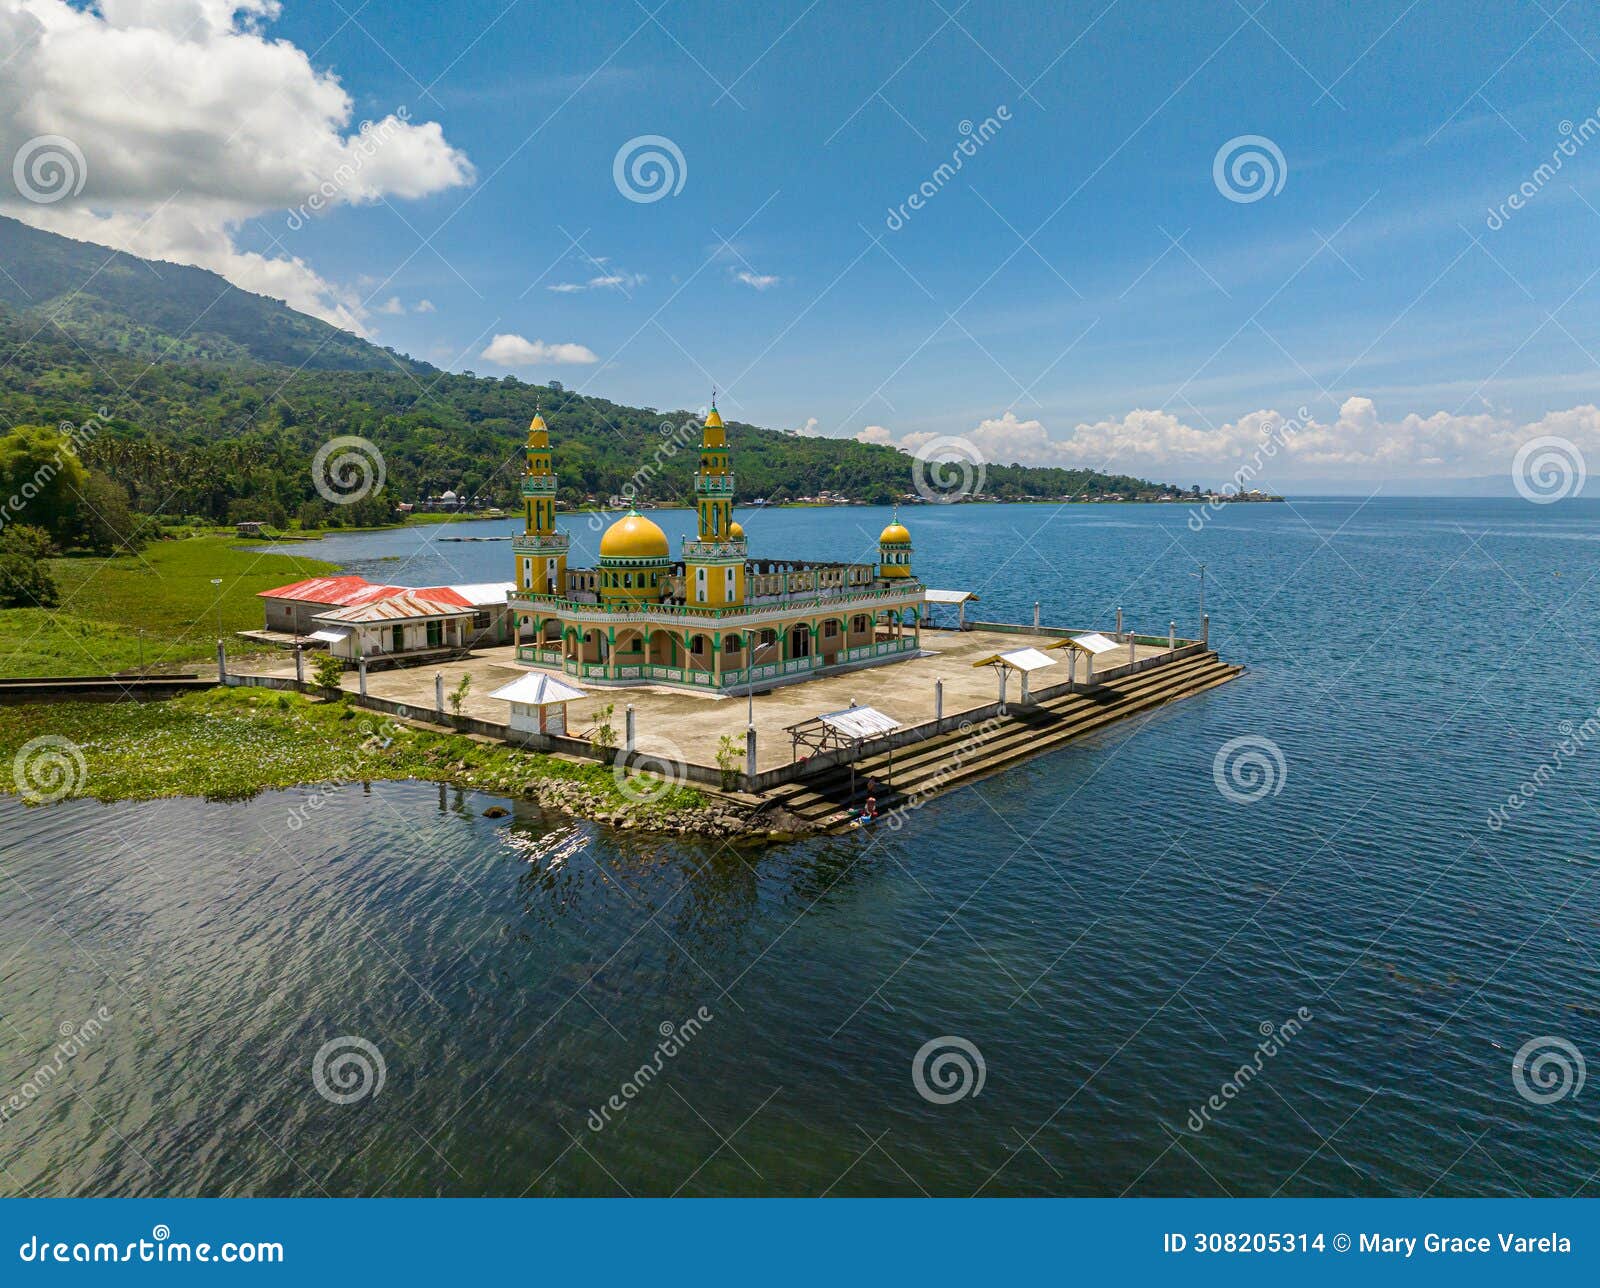 linuk masjid and lake lanao in lanao del sur. philippines.